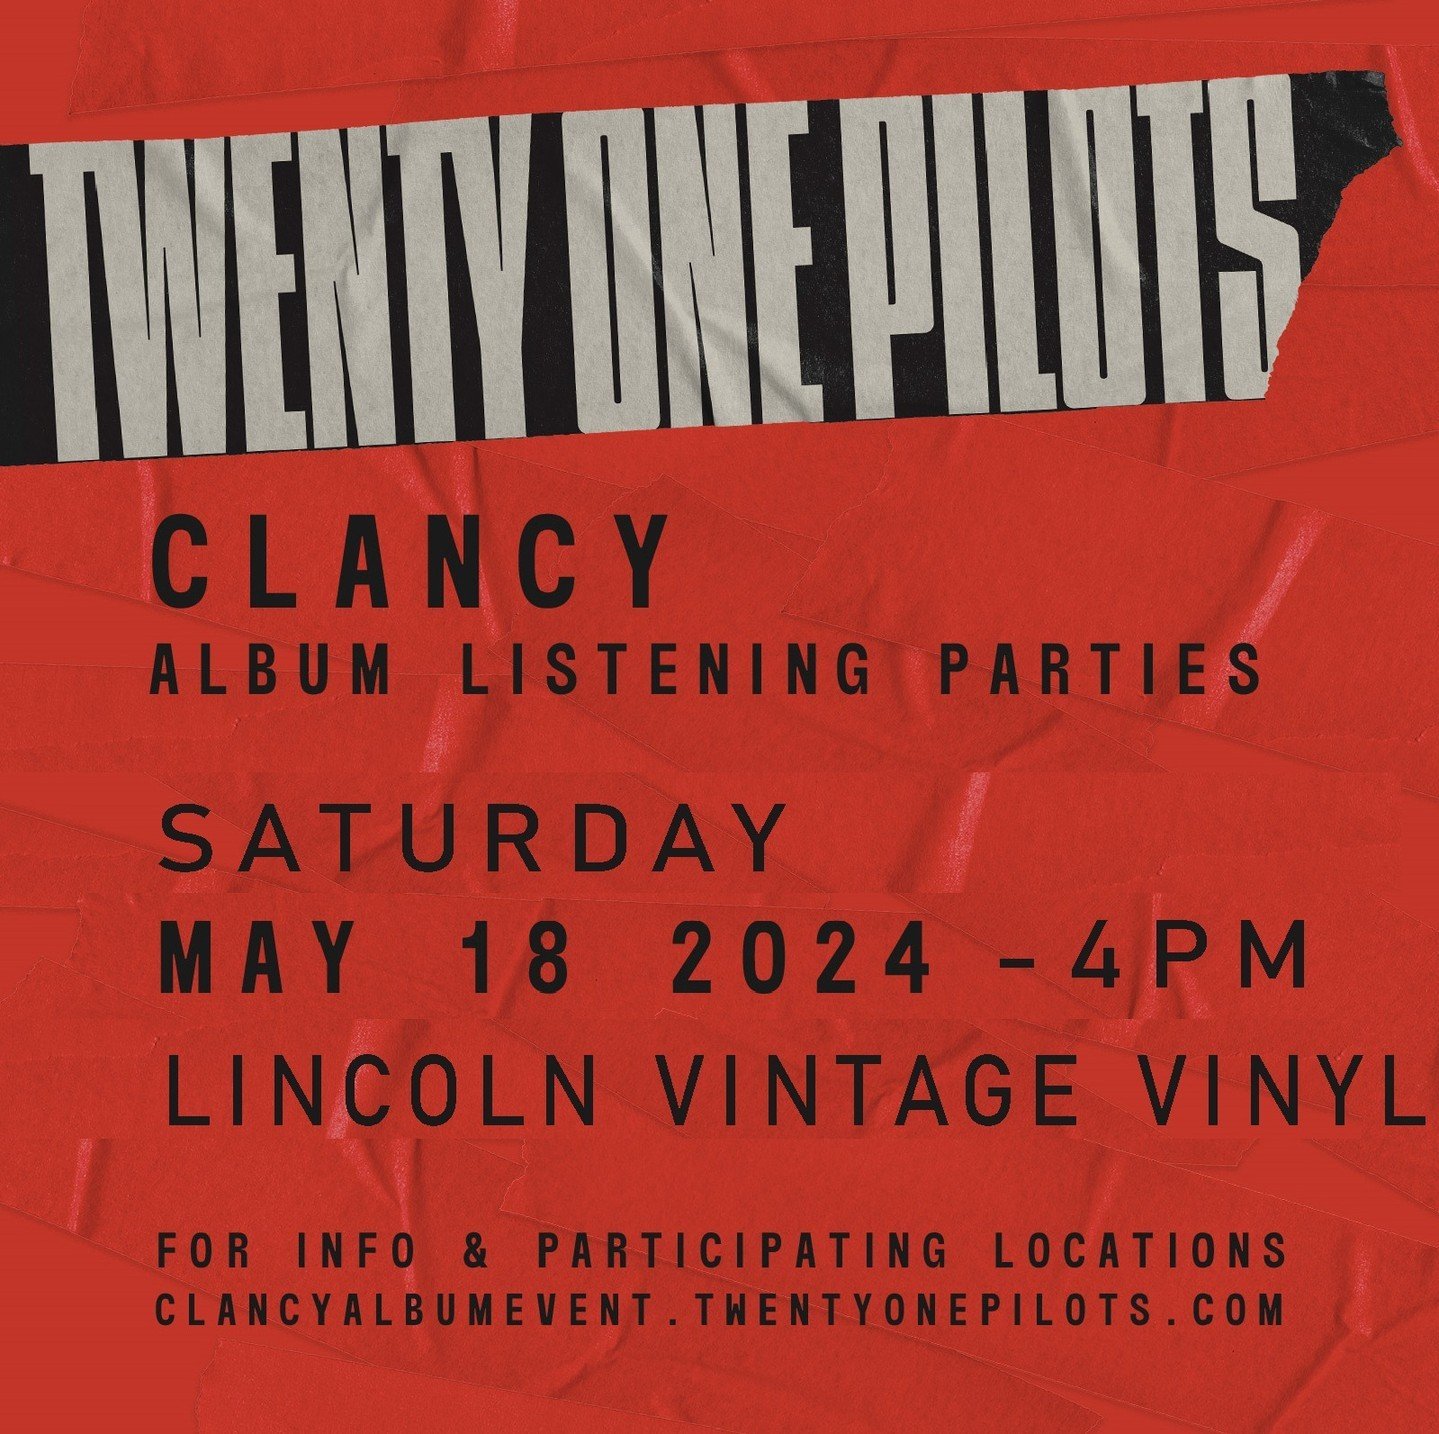 Next Saturday May 18th at 4PM we will be holding a listening party for the new Twenty One Pilots &ldquo;Clancy&rdquo; album at Lincoln Vintage Vinyl!  The new album comes out on Friday May 24th!  Stop by and listen to the new album before it&rsquo;s 